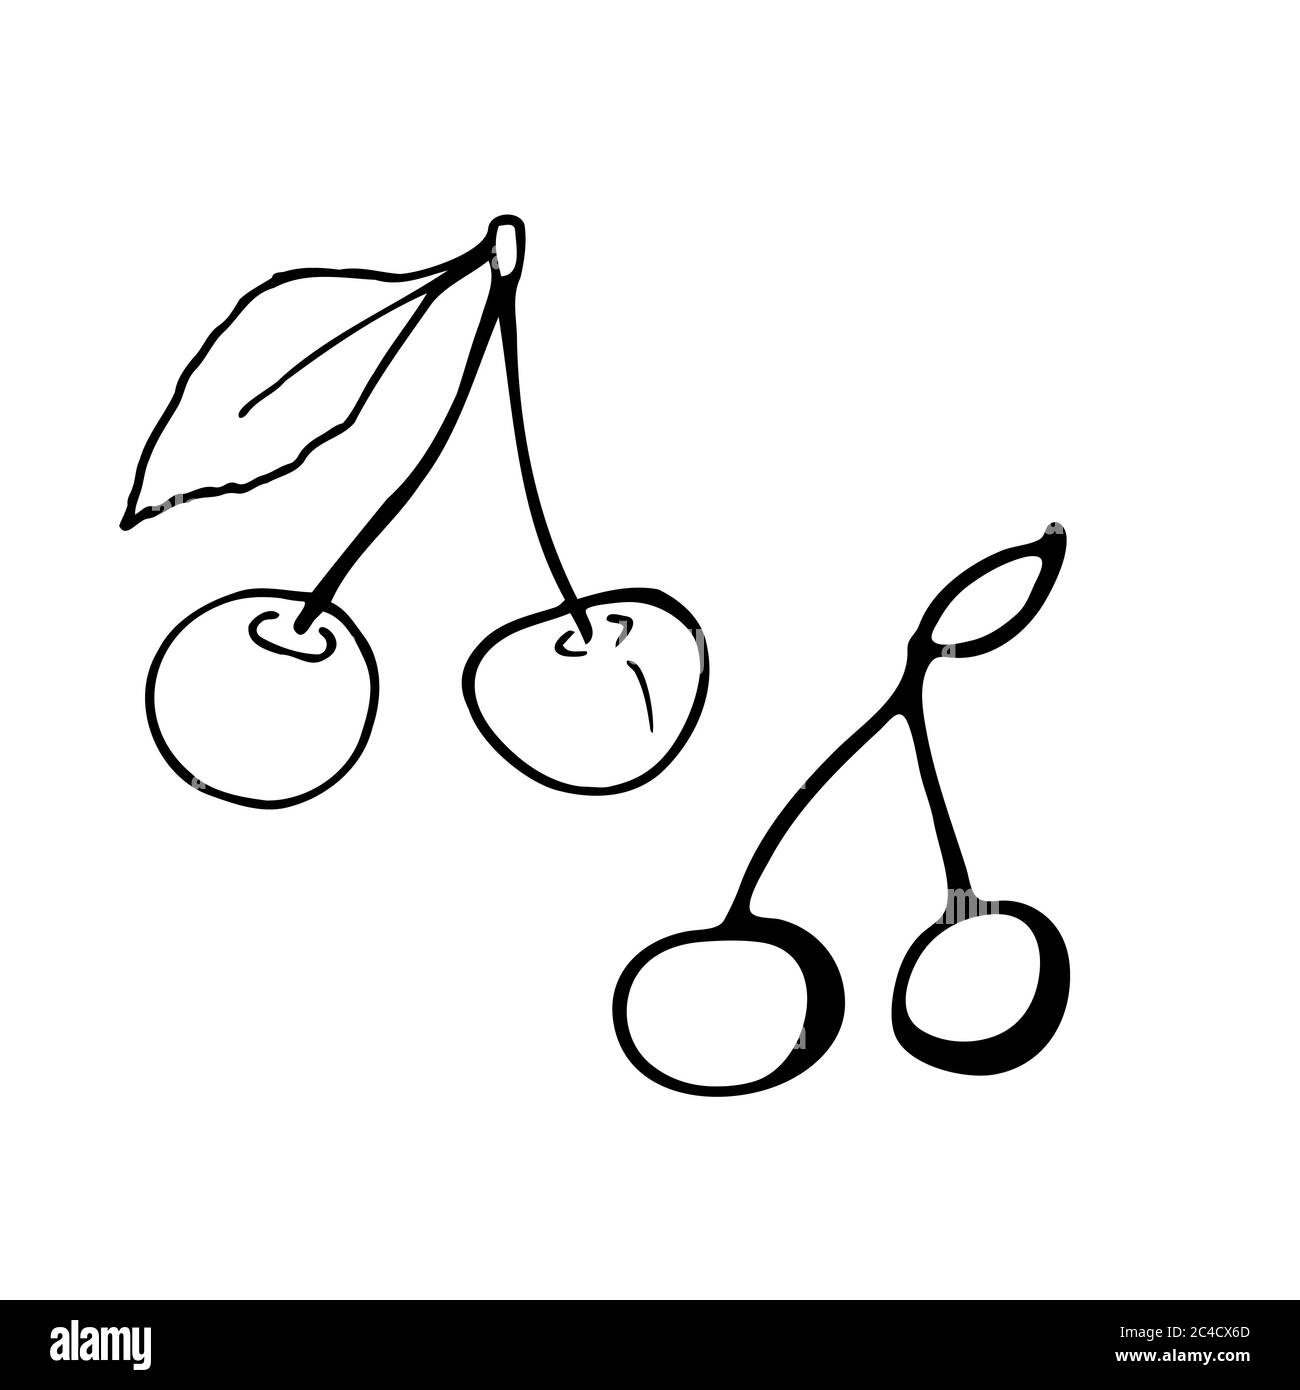 Cherry with stem and leaf. Hand drawn outline doodle icon. Transparent isolated on white background. Vector illustration for greeting cards, posters Stock Vector